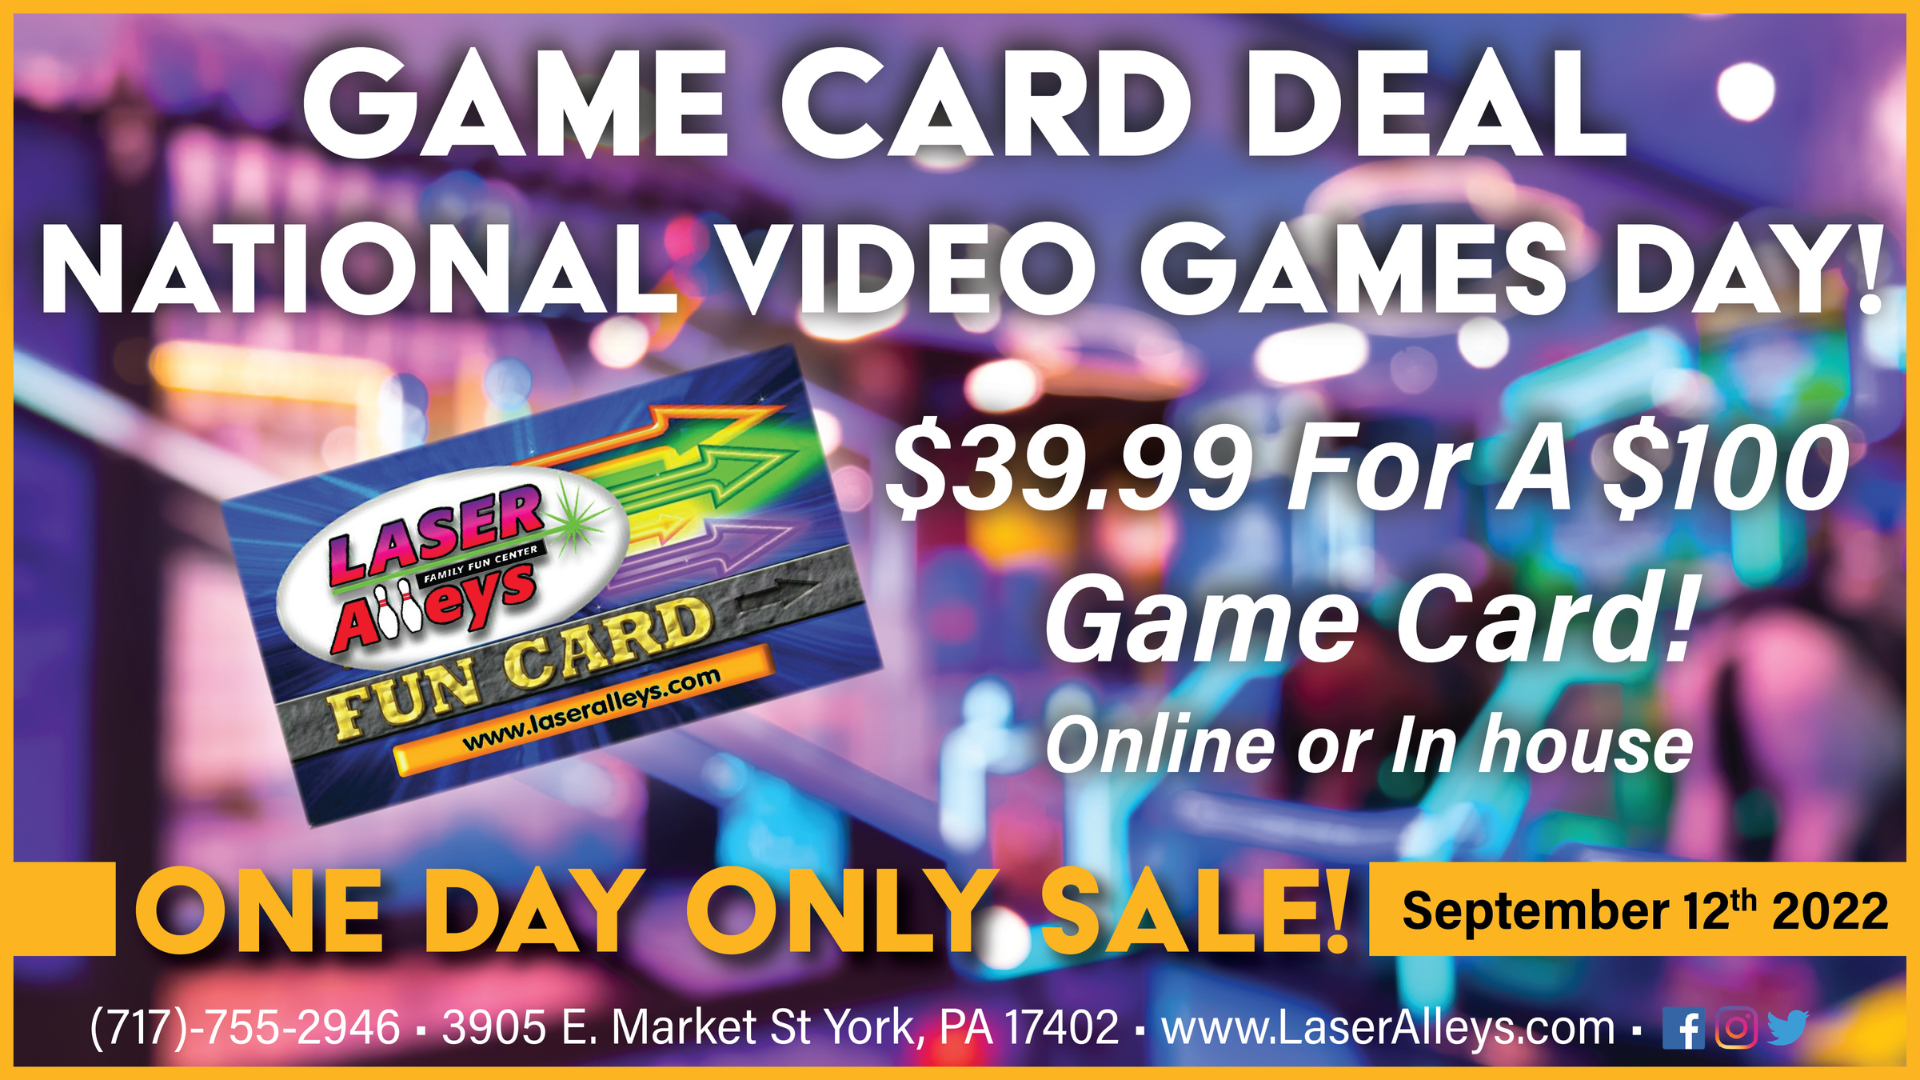 Laser alley nationa video game day